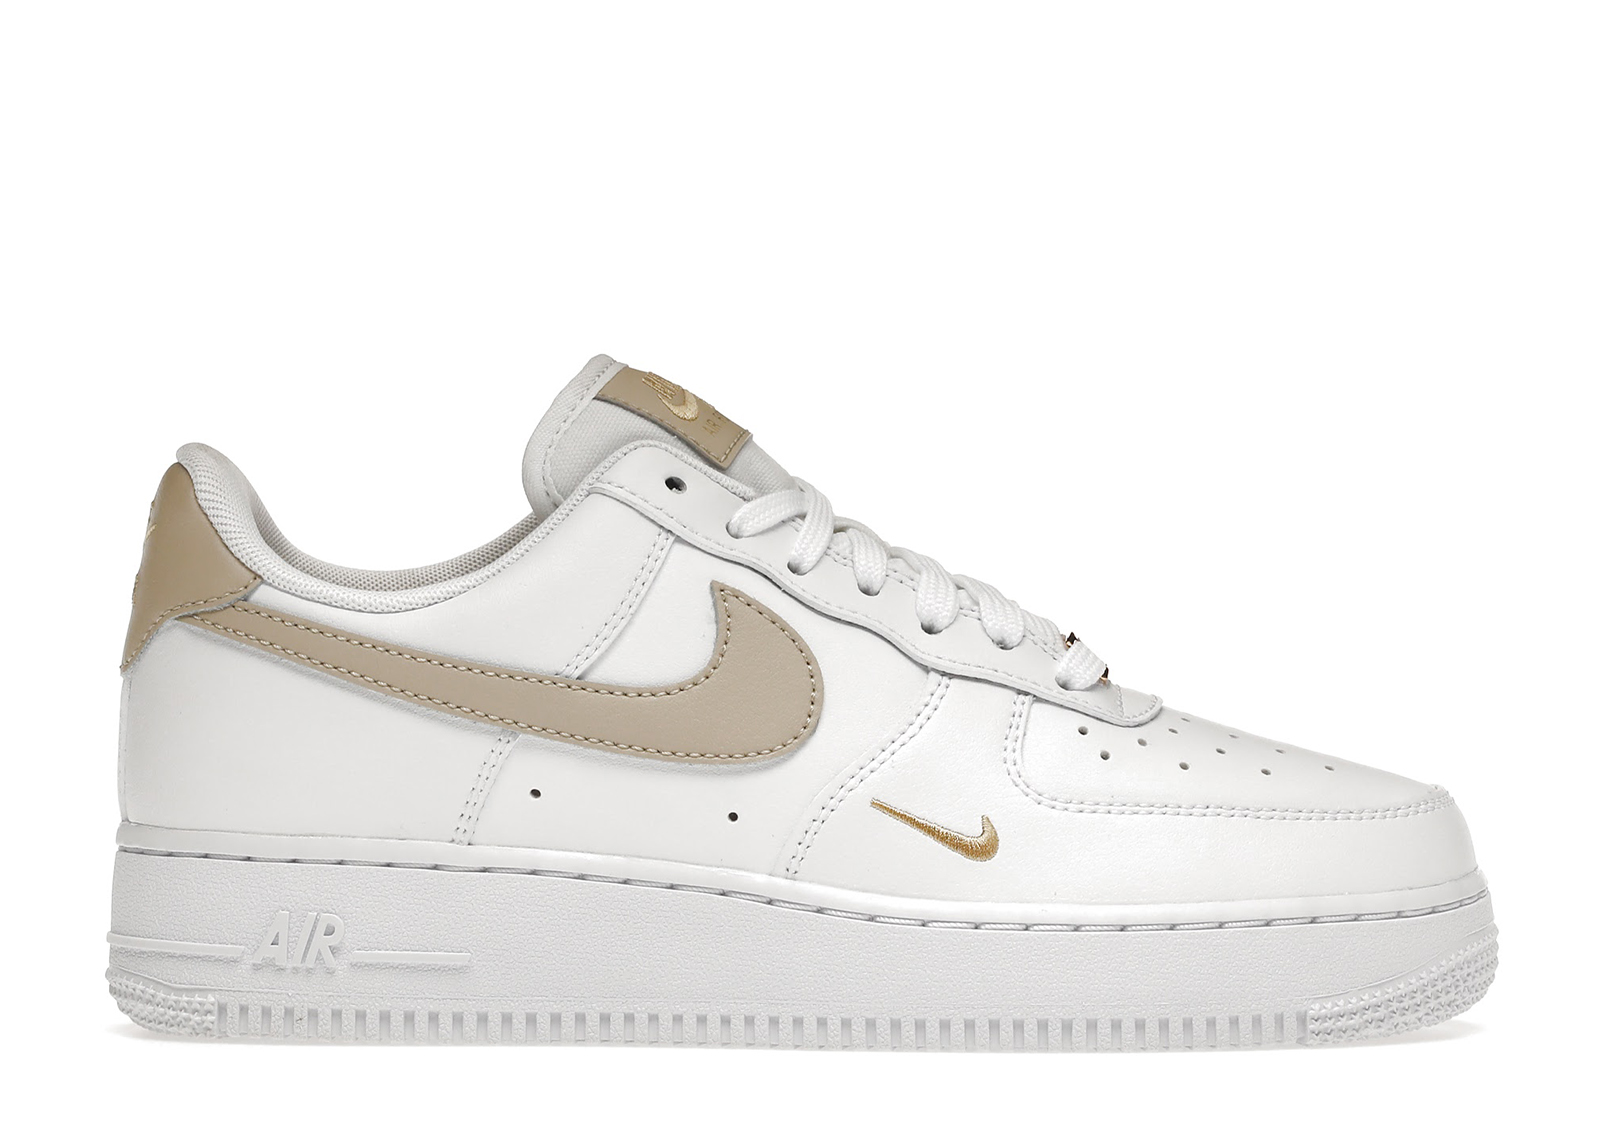 Nike Air Force 1 Low '07 Essential White Beige (Women's) - CZ0270 